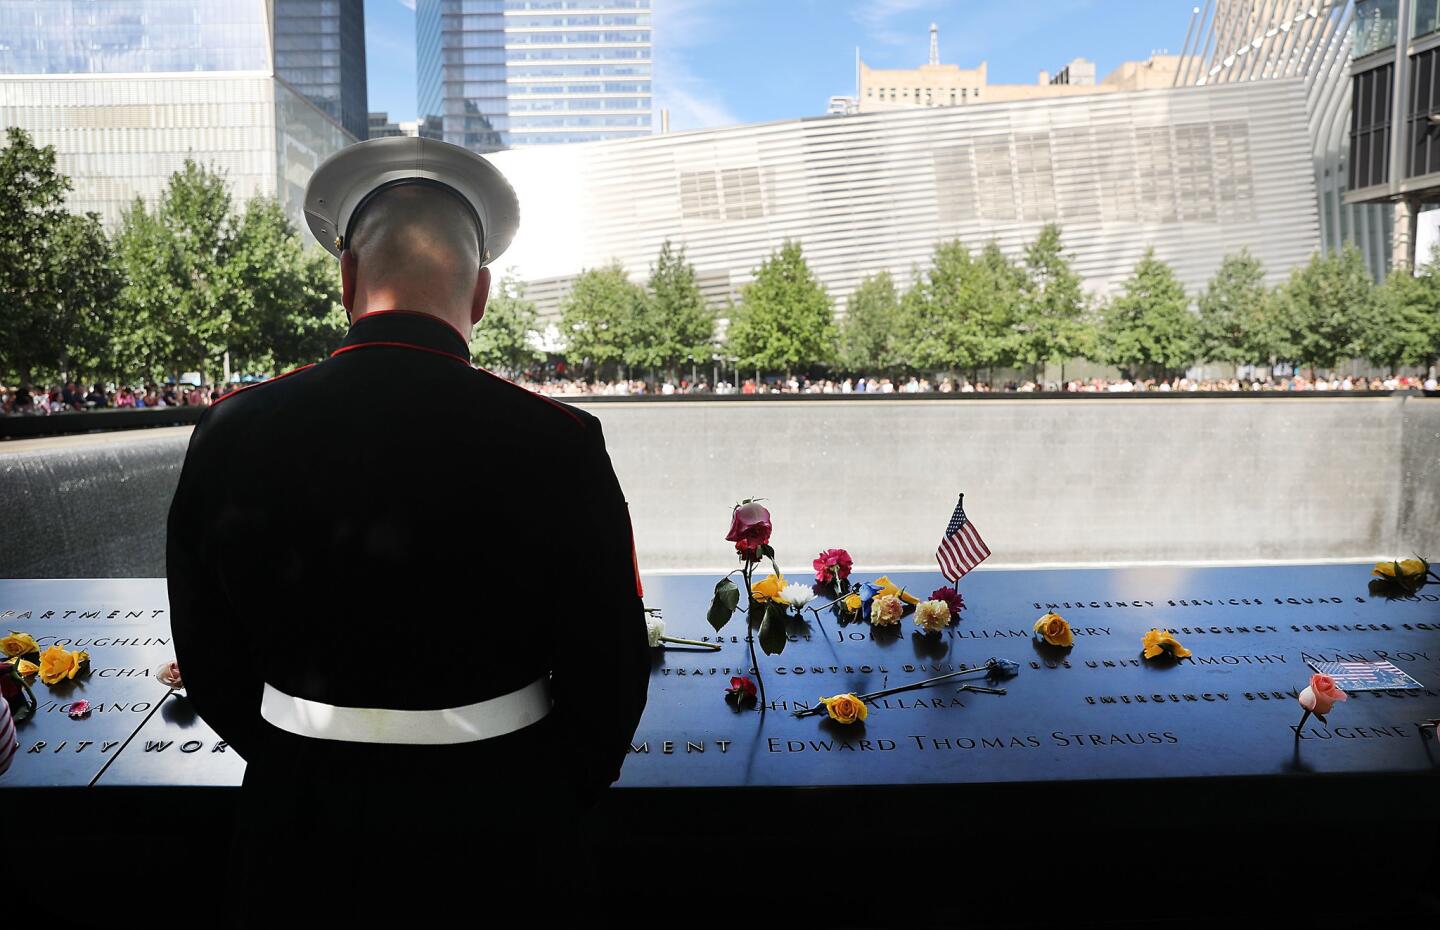 A U.S. Marine pauses at one of the pools at the National September 11 Memorial following a morning commemoration ceremony for the victims of the terrorist attacks fifteen years after the day on September 11, 2016 in New York City.